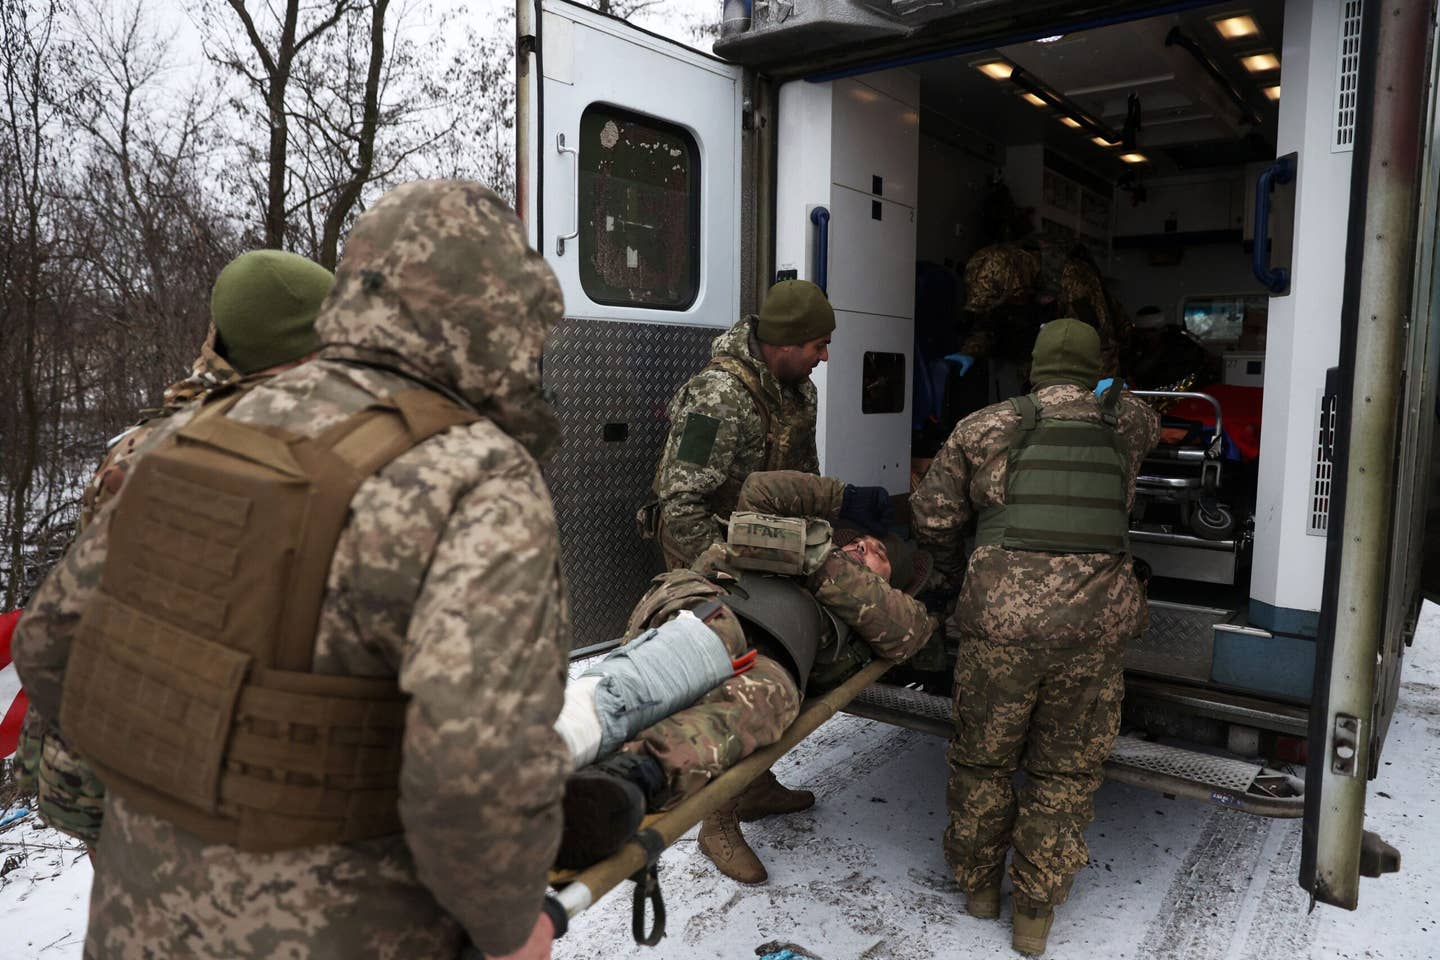 Medics of the Ukrainian Army evacuate a wounded soldier on a road near Soledar, Oblast on Jan. 14, 2023. (Photo by ANATOLII STEPANOV/AFP via Getty Images)